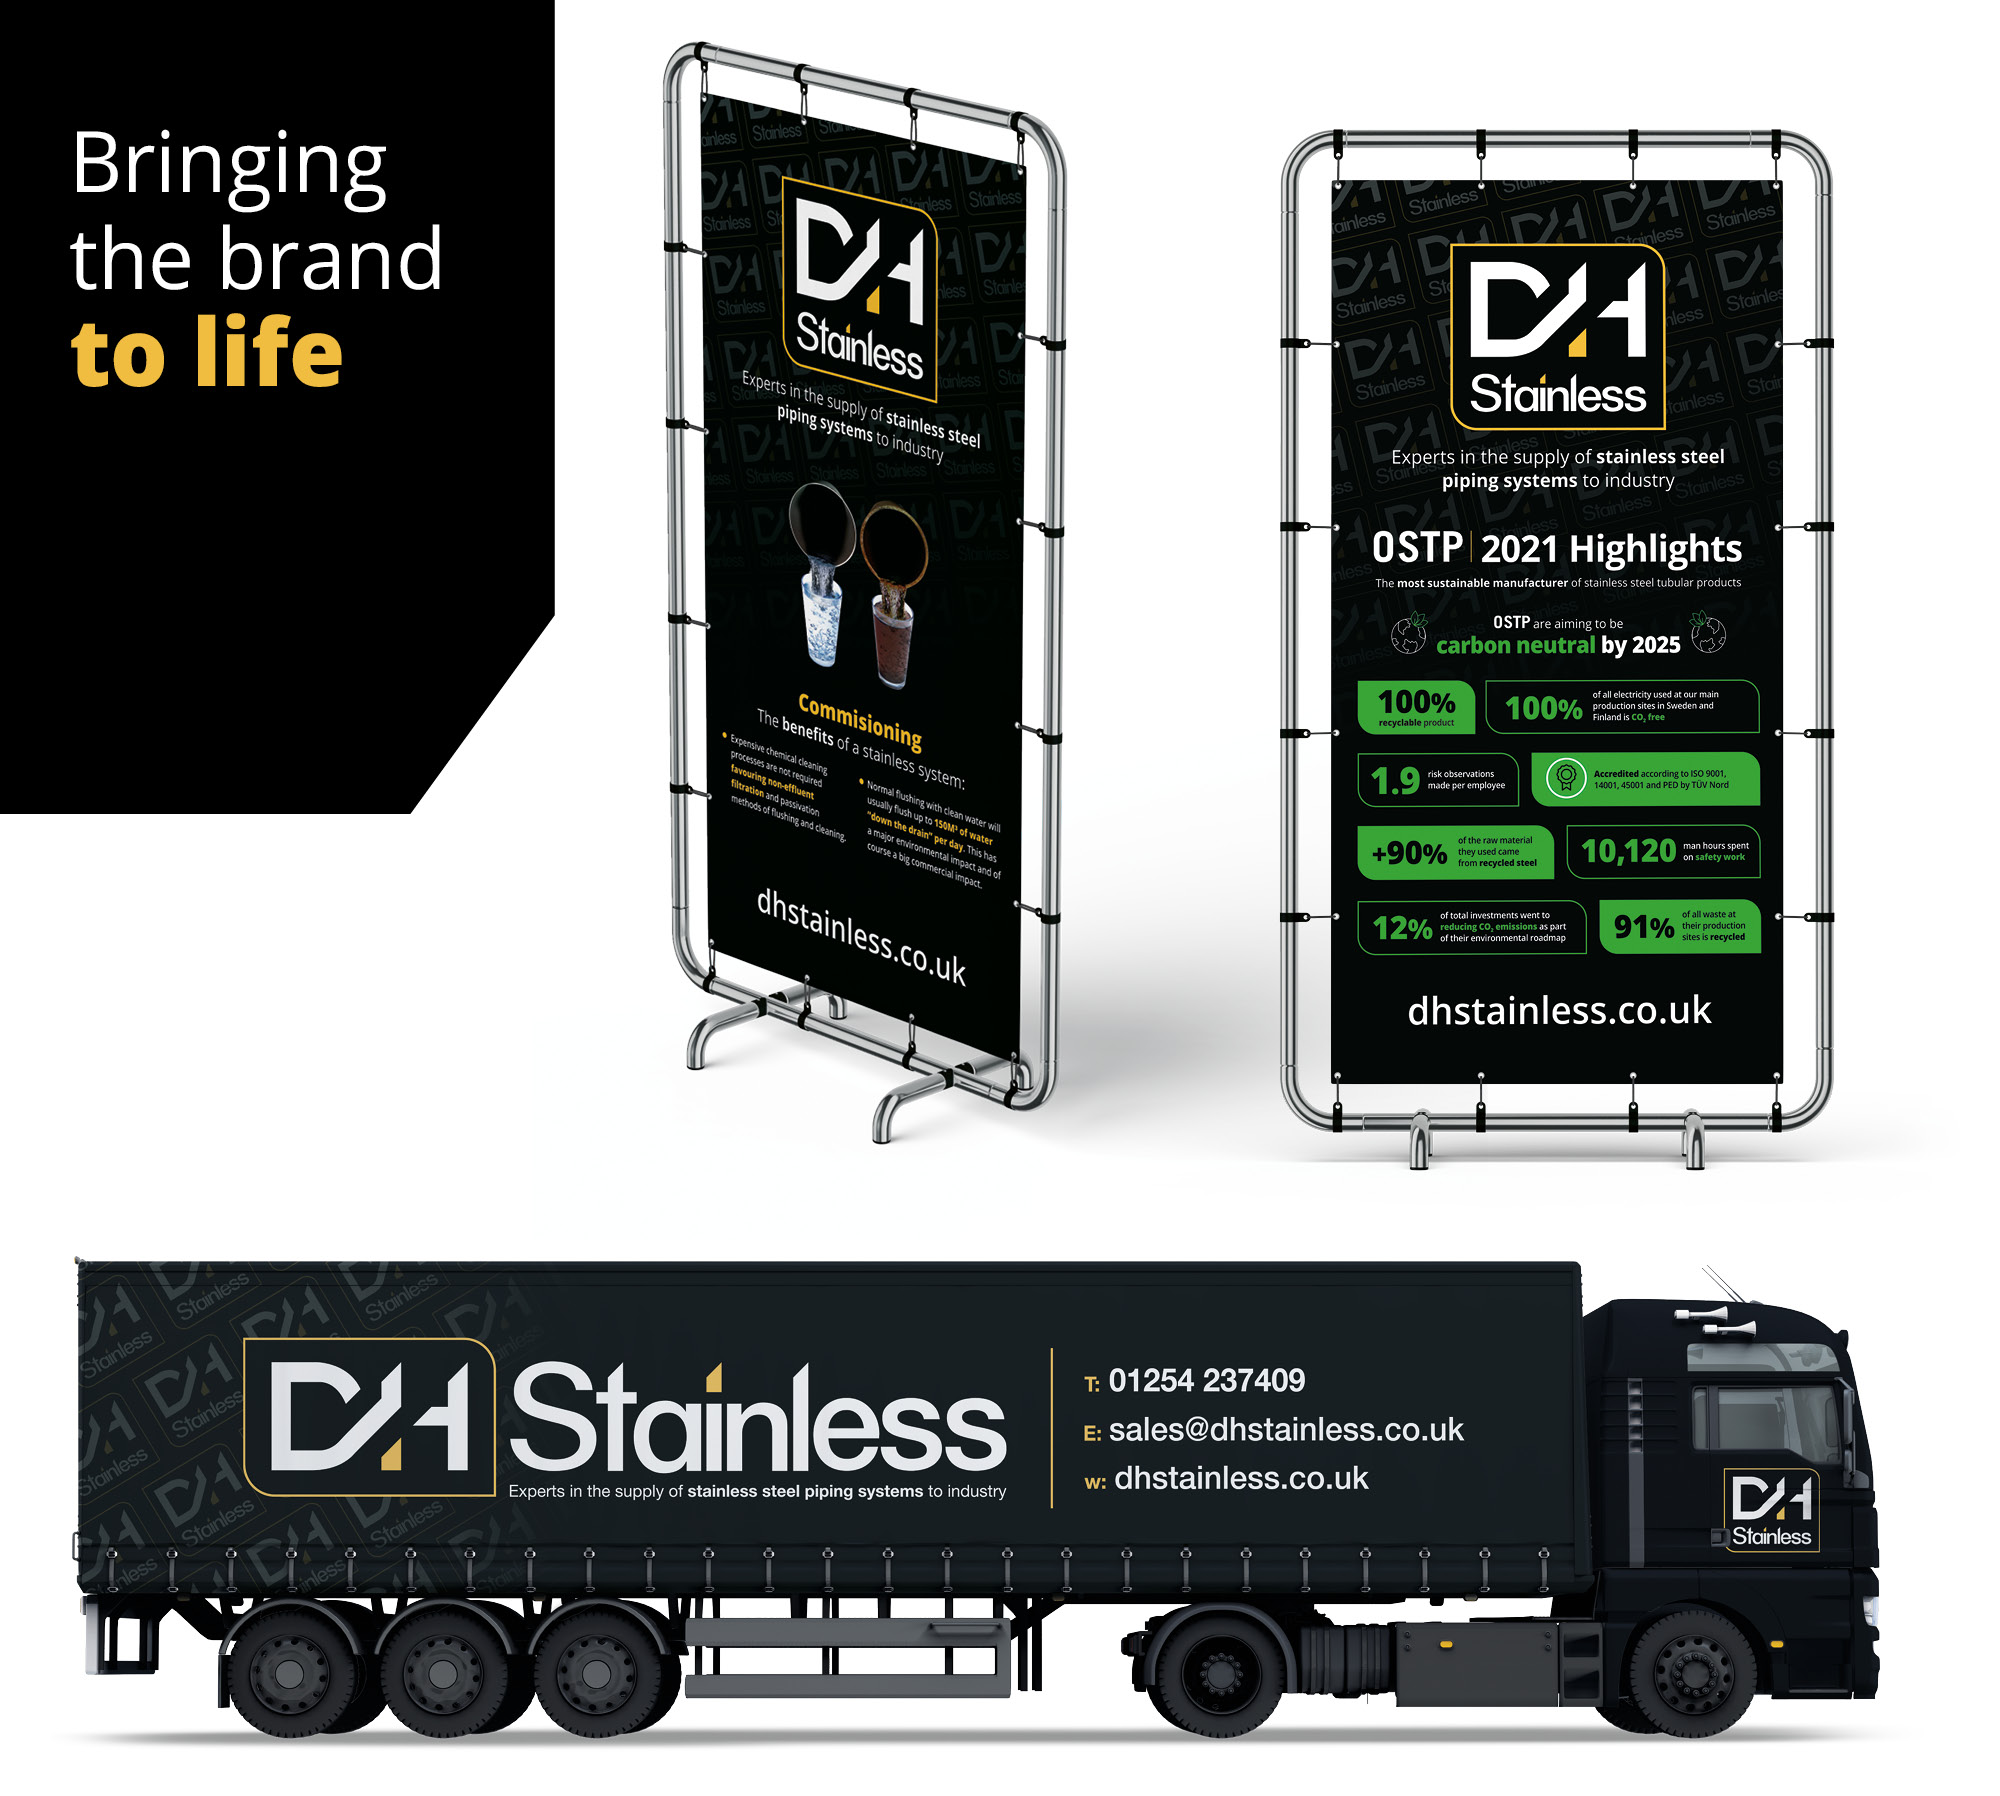 Exhibition Banners and Lorry Graphic Design for DH Stainless